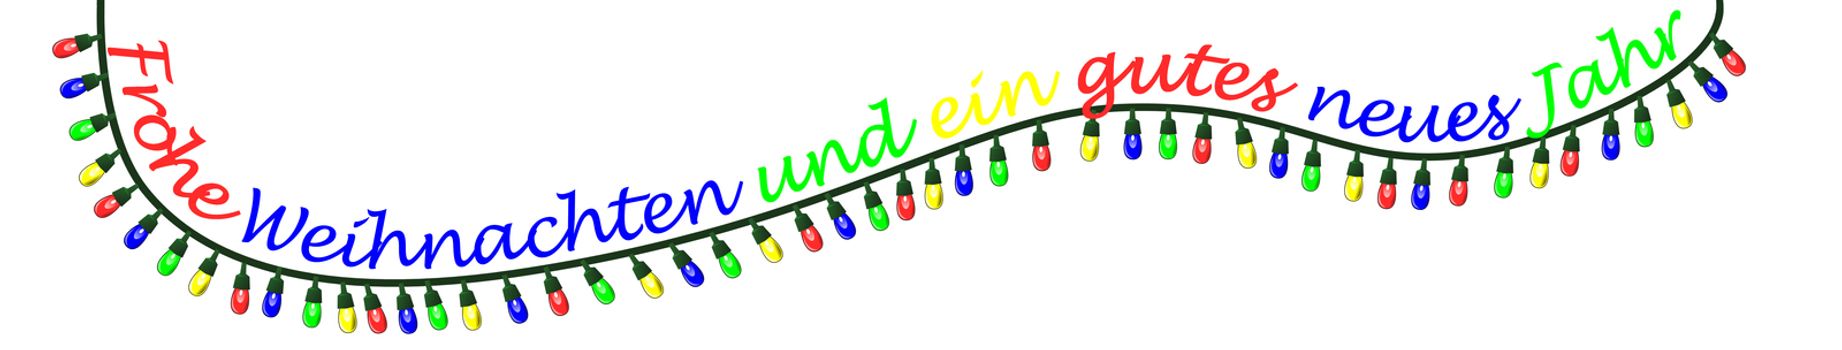 Christmas lights and the german words for Merry Christmas and a happy new year, christmas card